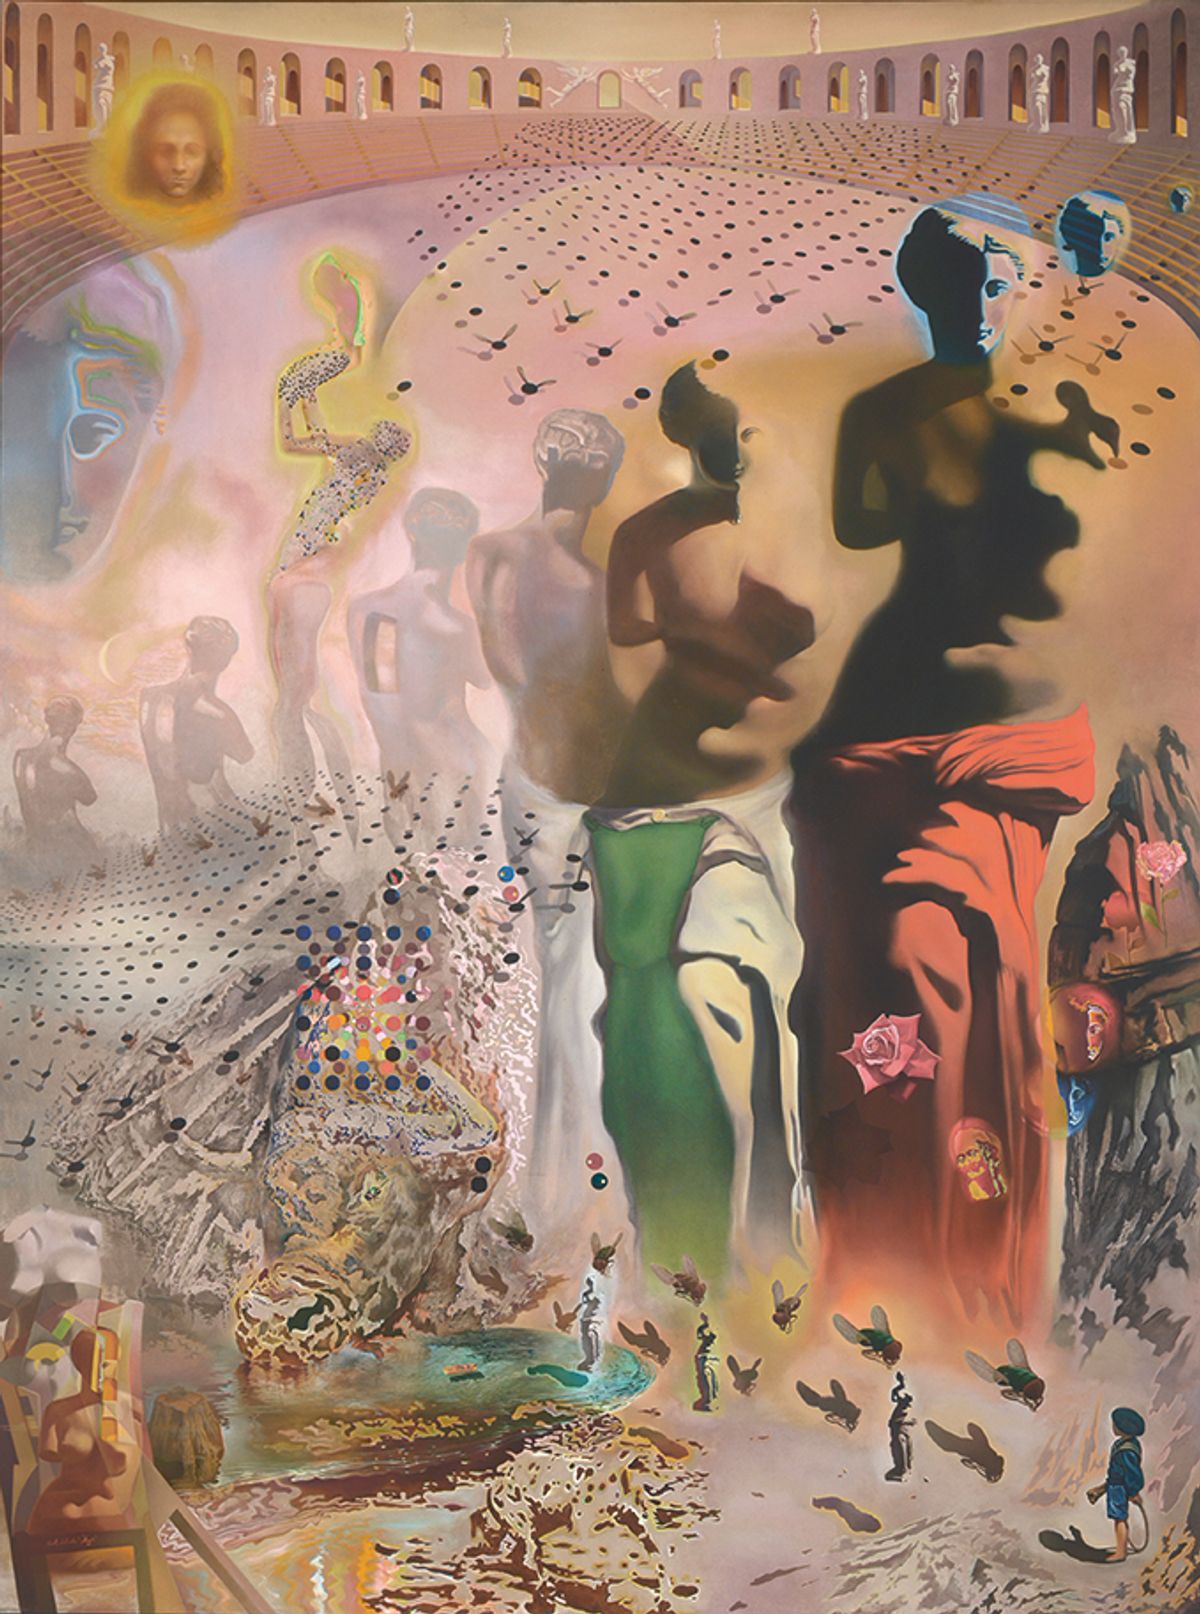 The Hallucinogenic Toreador (1968-70) by Salvador Dalí  Courtesy of The Dalí Museum, St. Petersburg, Florida, US